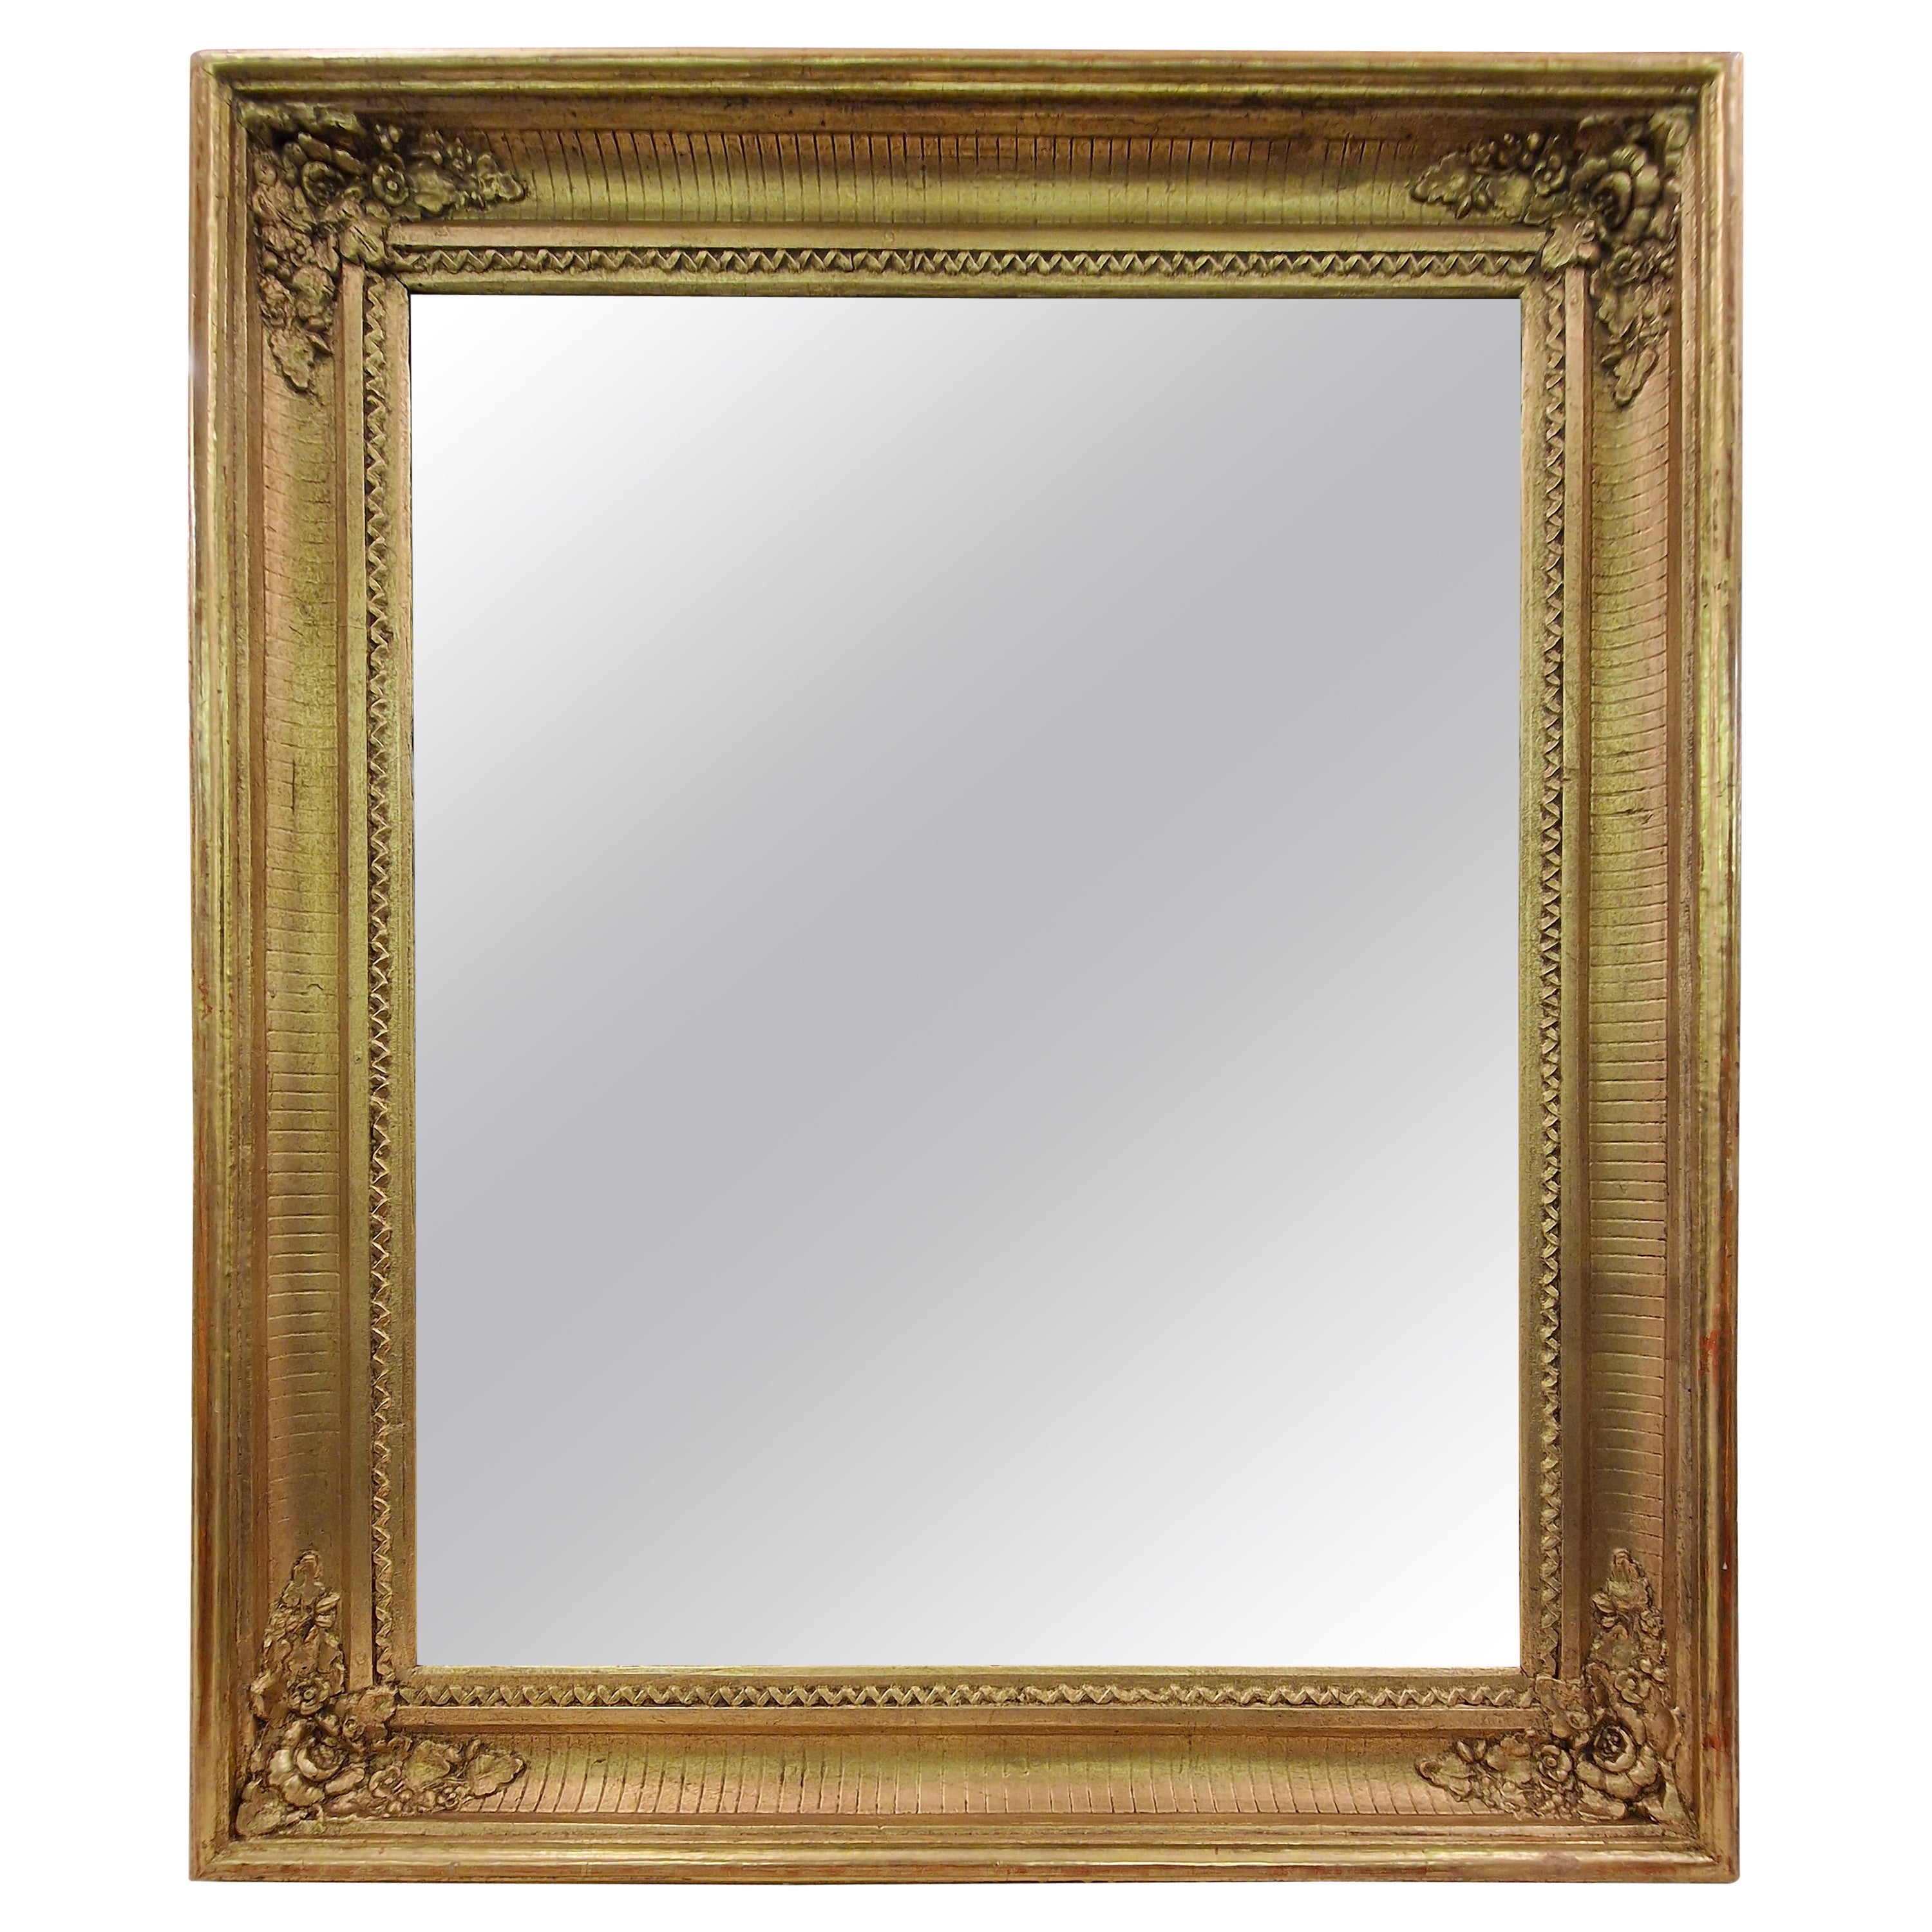 Magnificent Wall Mirror, Frame, gold, original from 1880, Austria